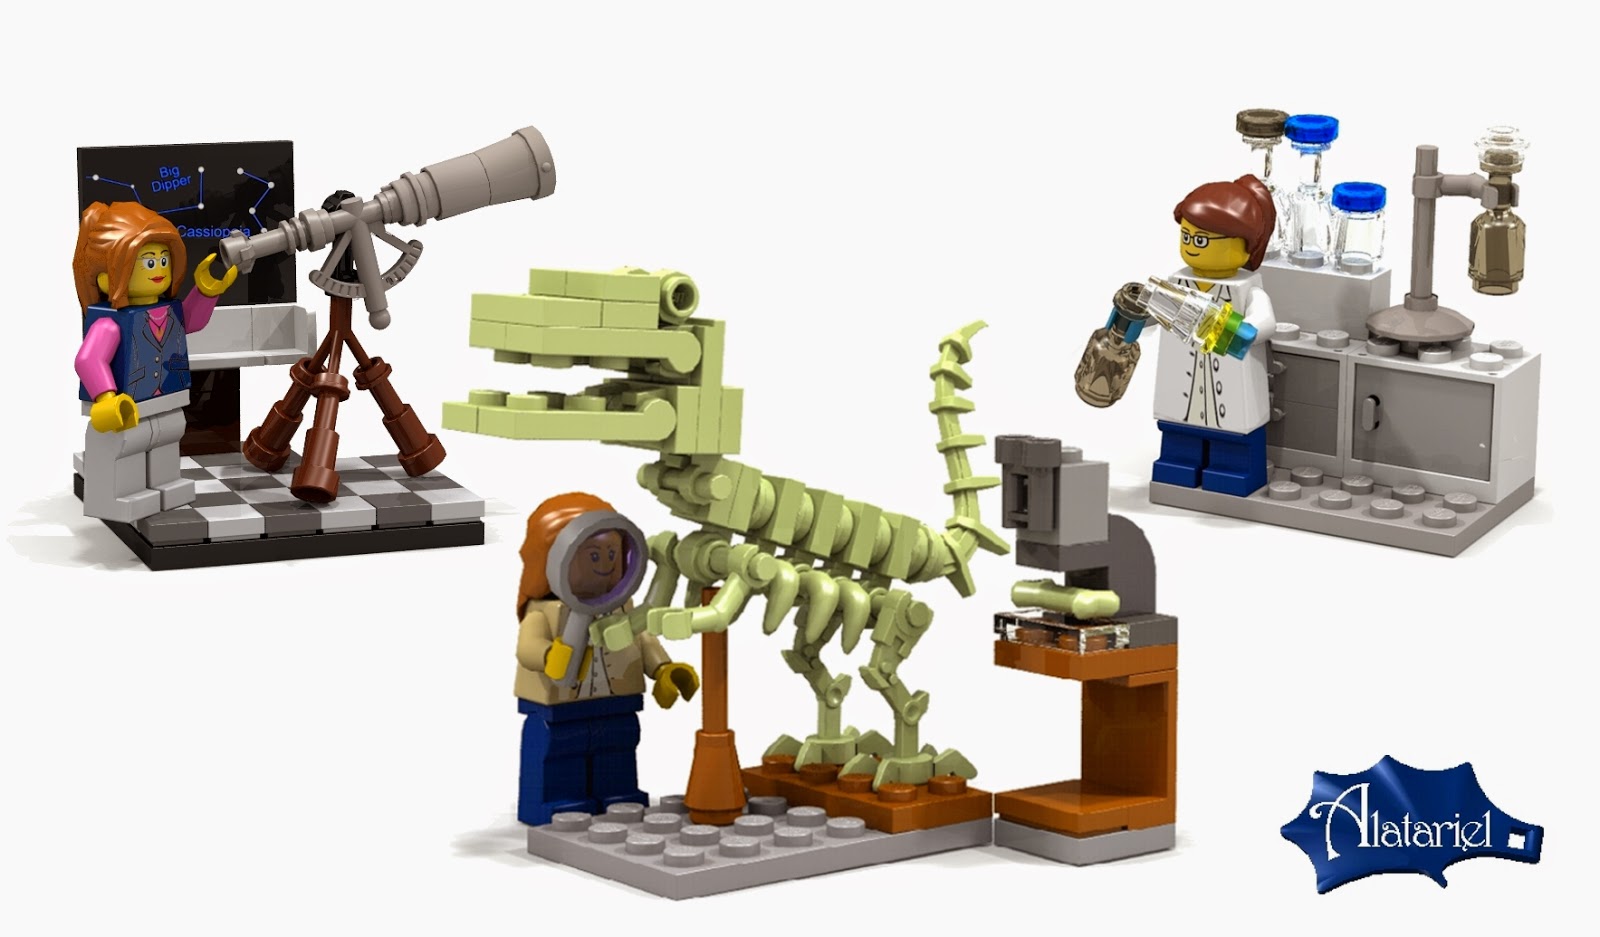 The Research Institute set includes an astronomer, a paleontologist, and a chemist -- all female.